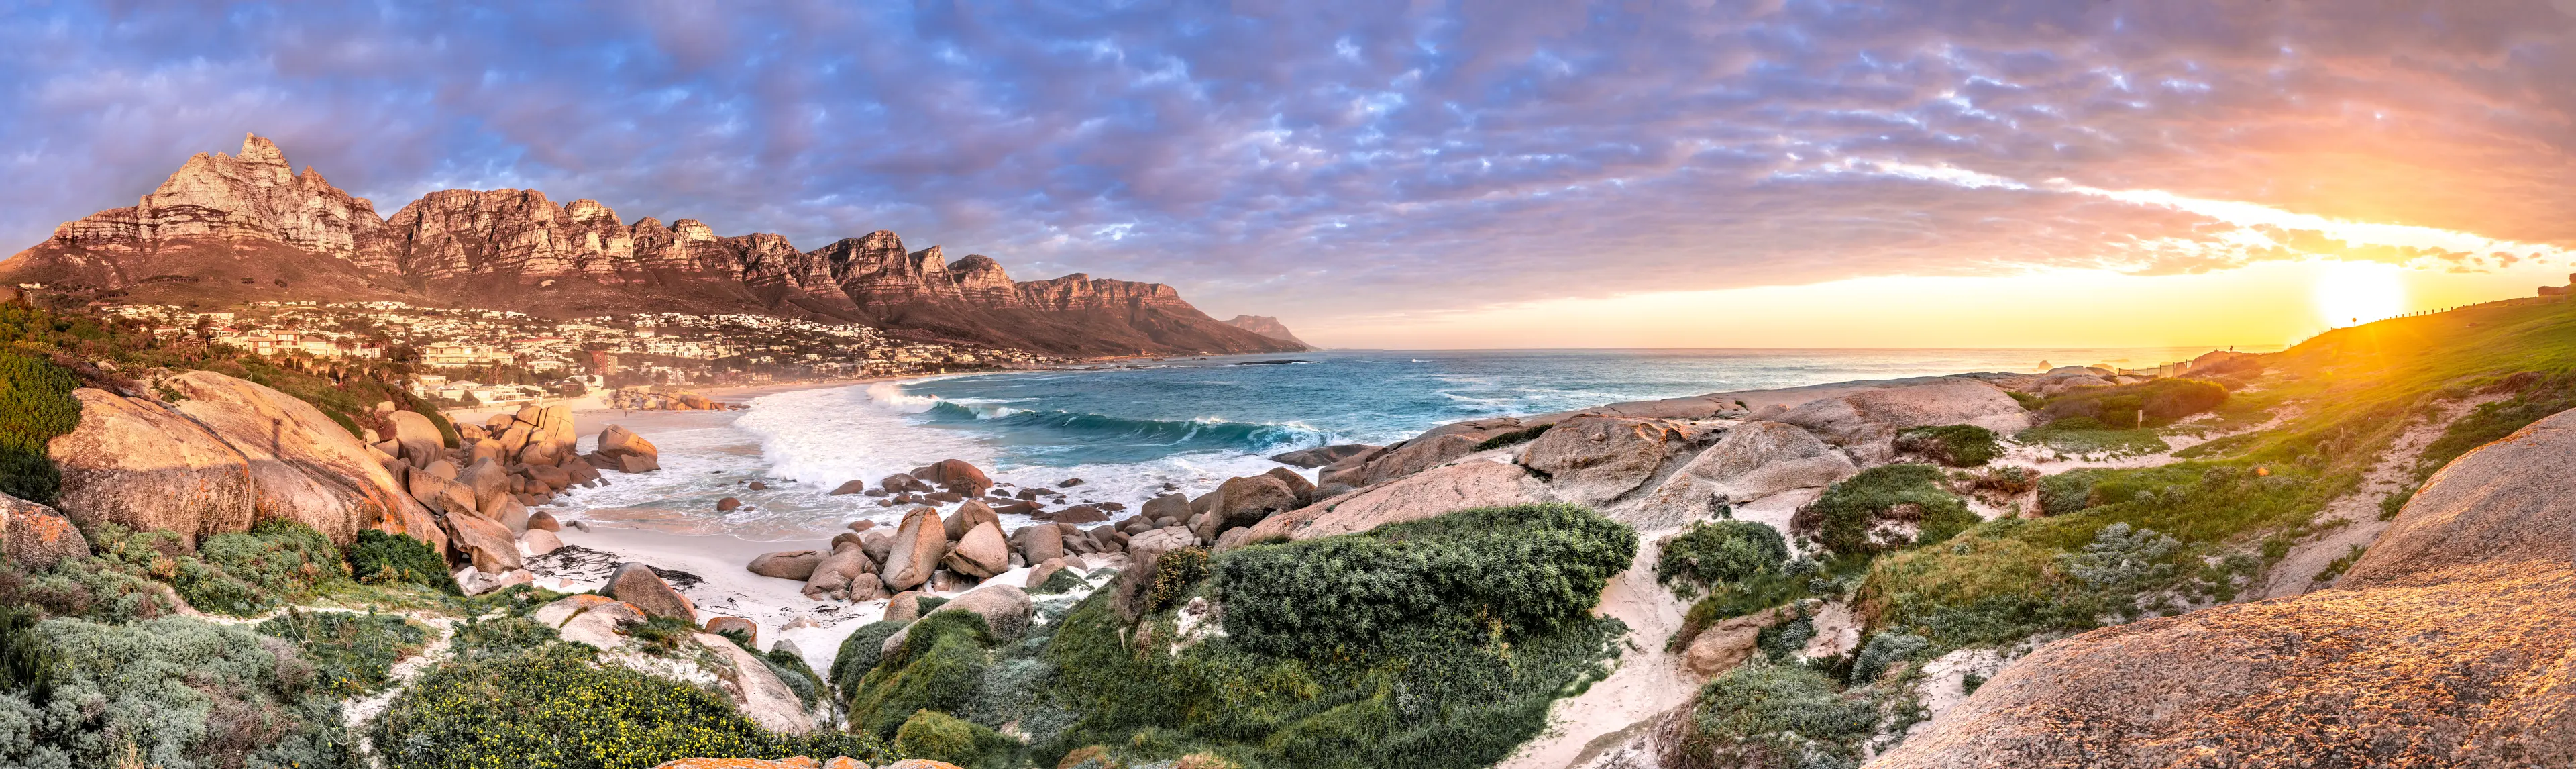 24 Hours Exciting Getaway in Cape Town, South Africa